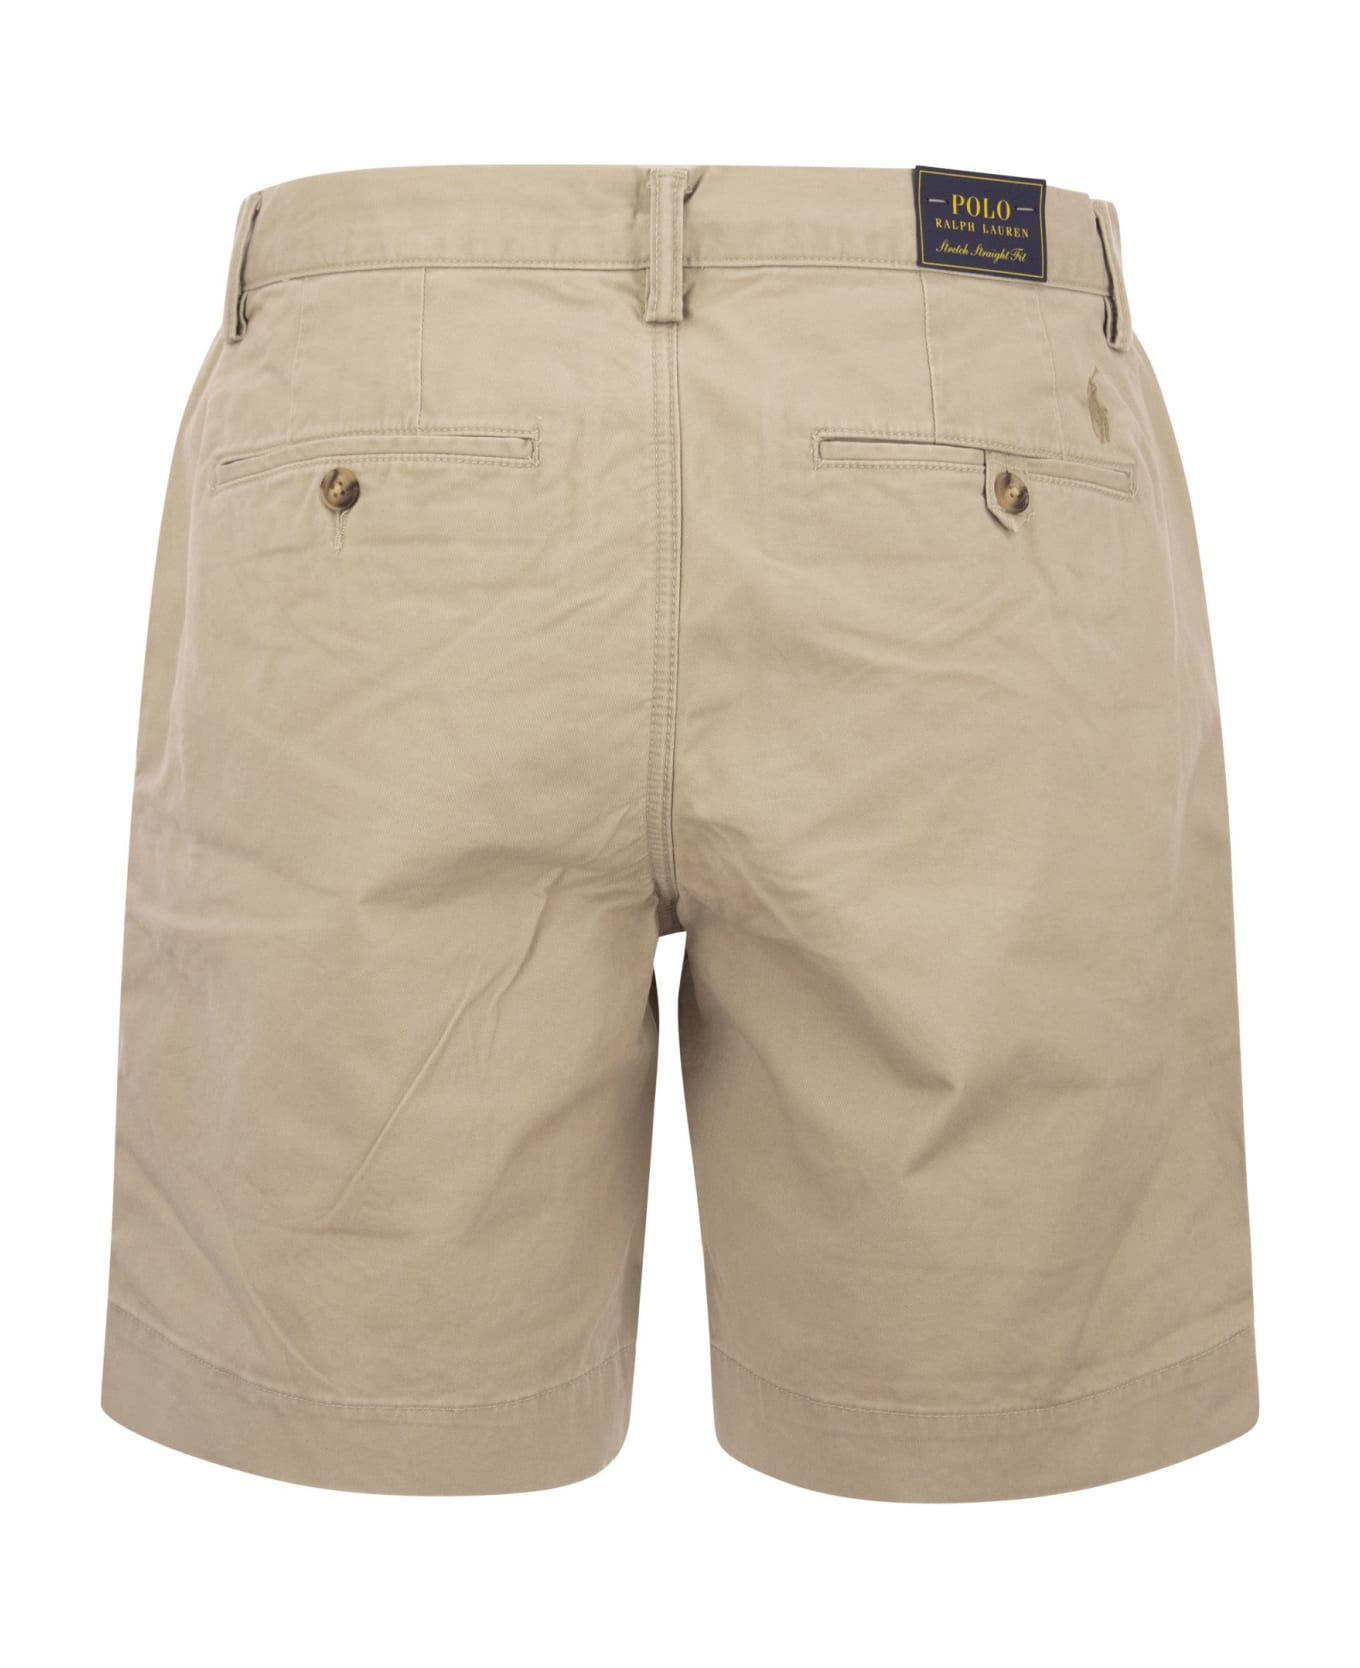 Polo Ralph Lauren Stretch Classic Fit Chino Short - Sand